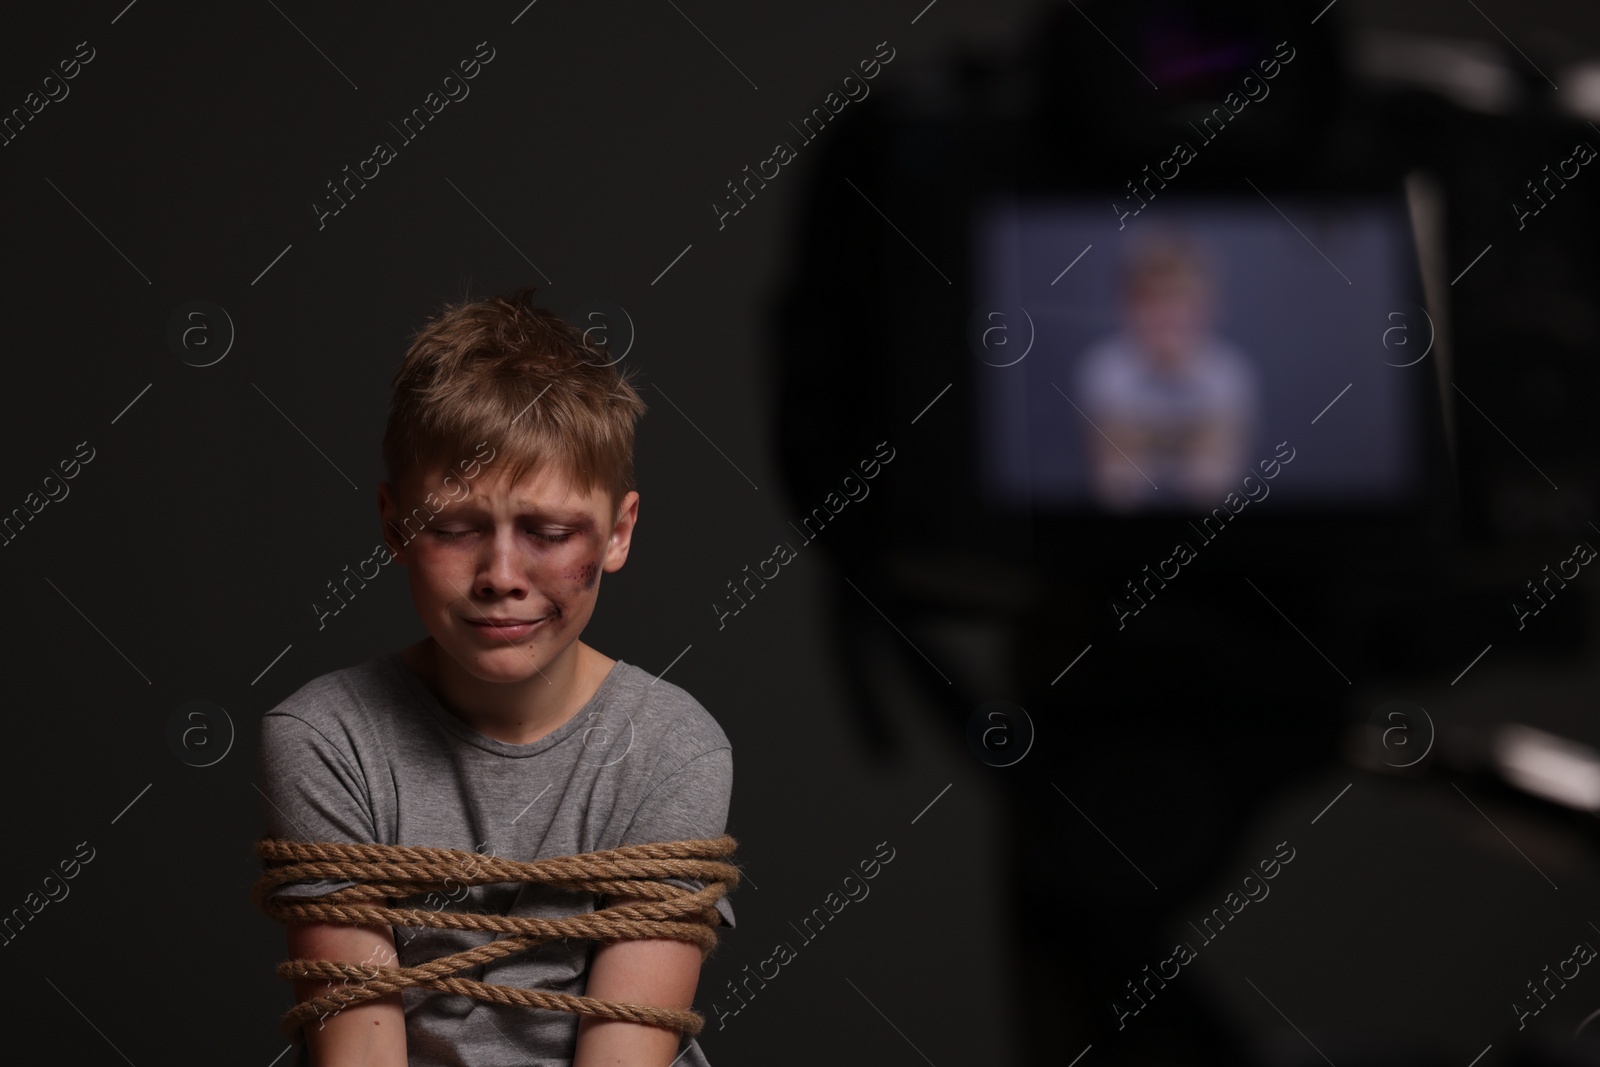 Photo of Little boy with bruises tied up and taken hostage near camera on dark background, selective focus